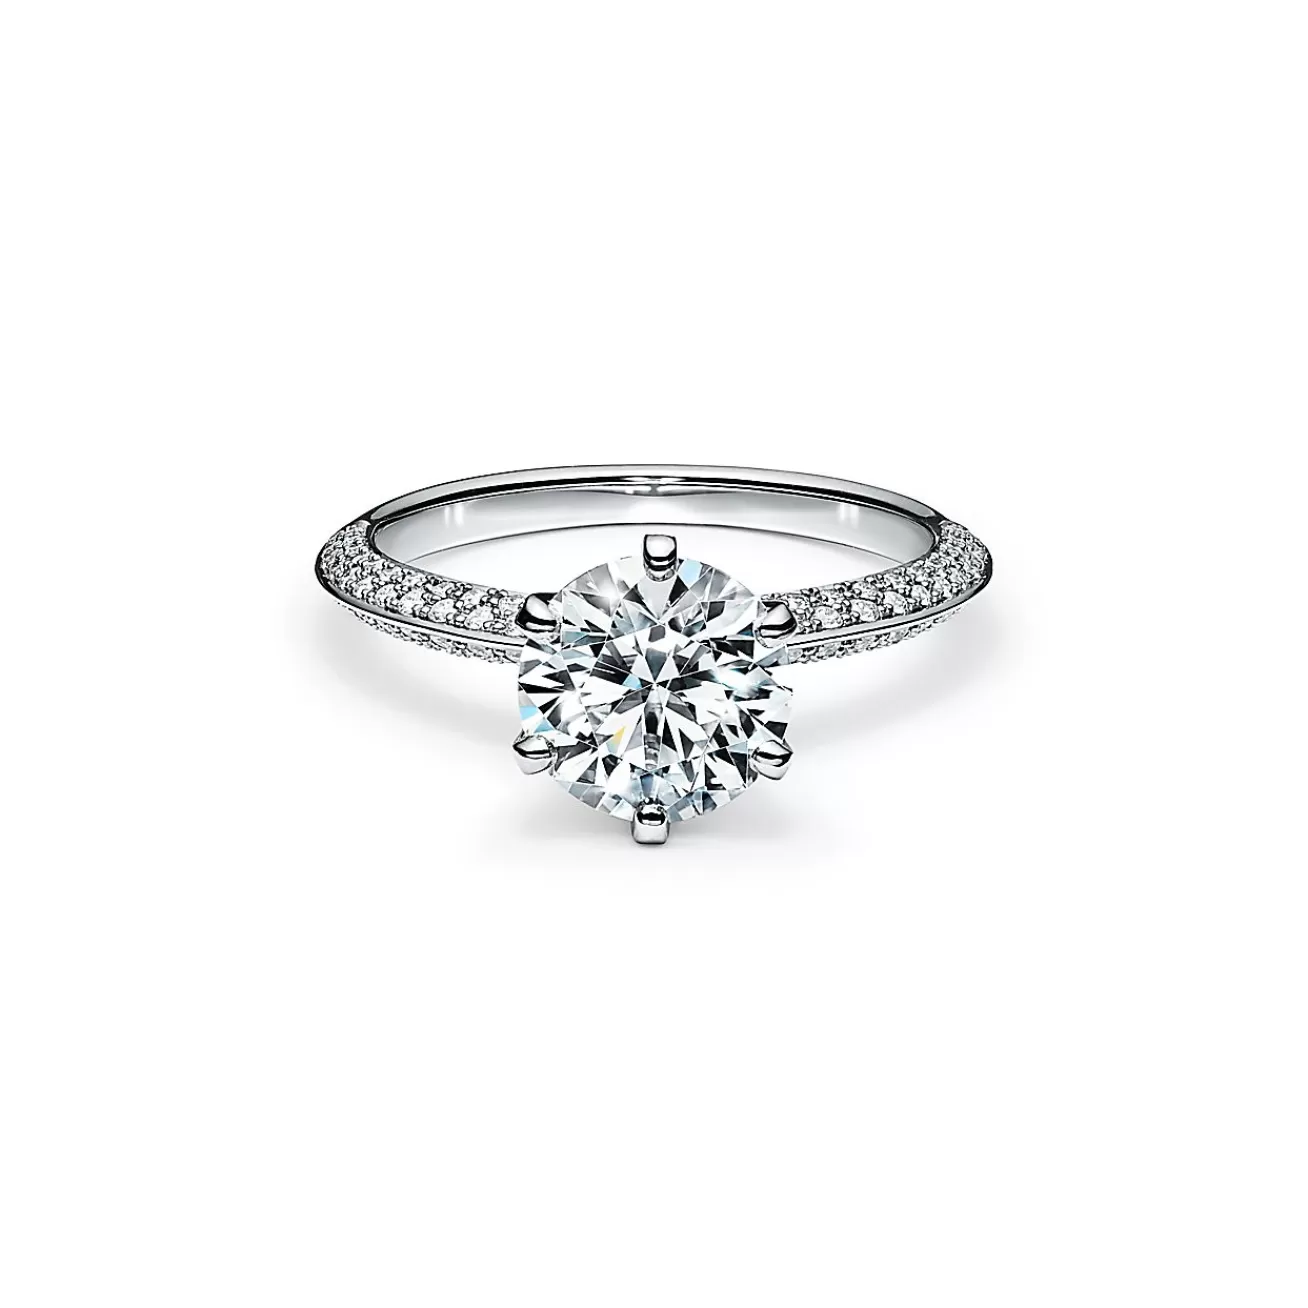 Tiffany & Co. Pavé Tiffany® Setting with a diamond band: world's most iconic engagement ring. | ^ Engagement Rings